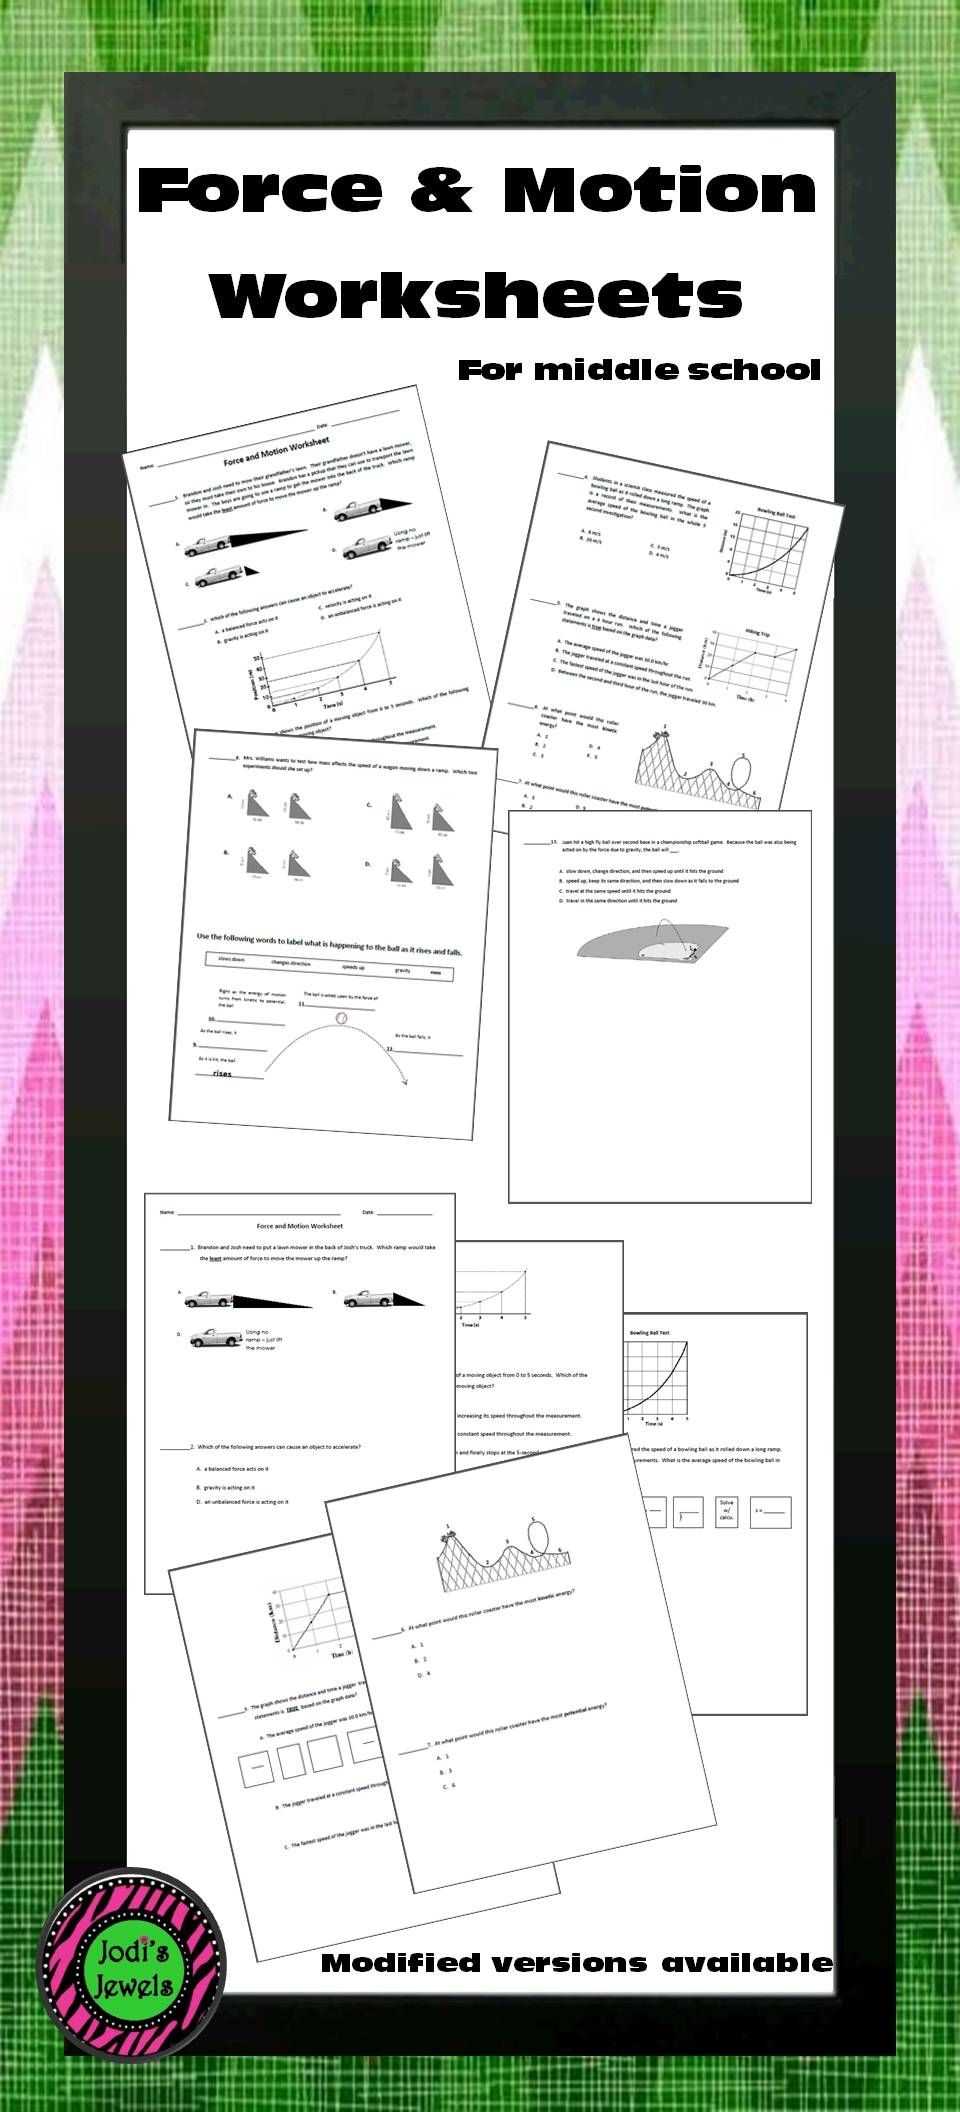 Potential and Kinetic Energy Roller Coaster Worksheet or force and Motion Worksheet Pinterest